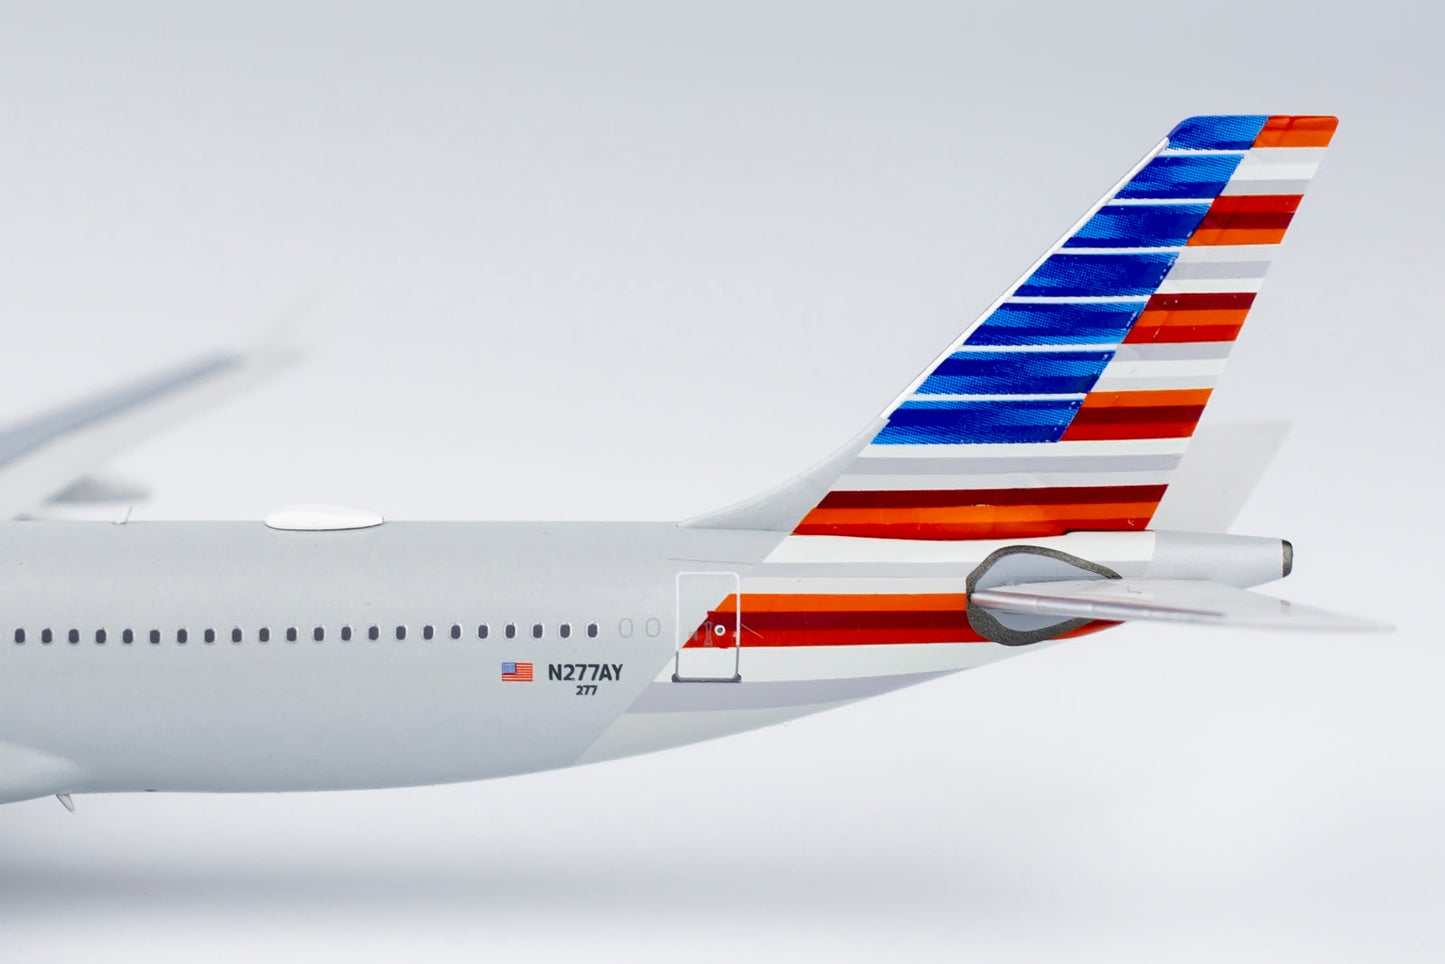 1/400 American Airlines A330-300 NG Models 62026